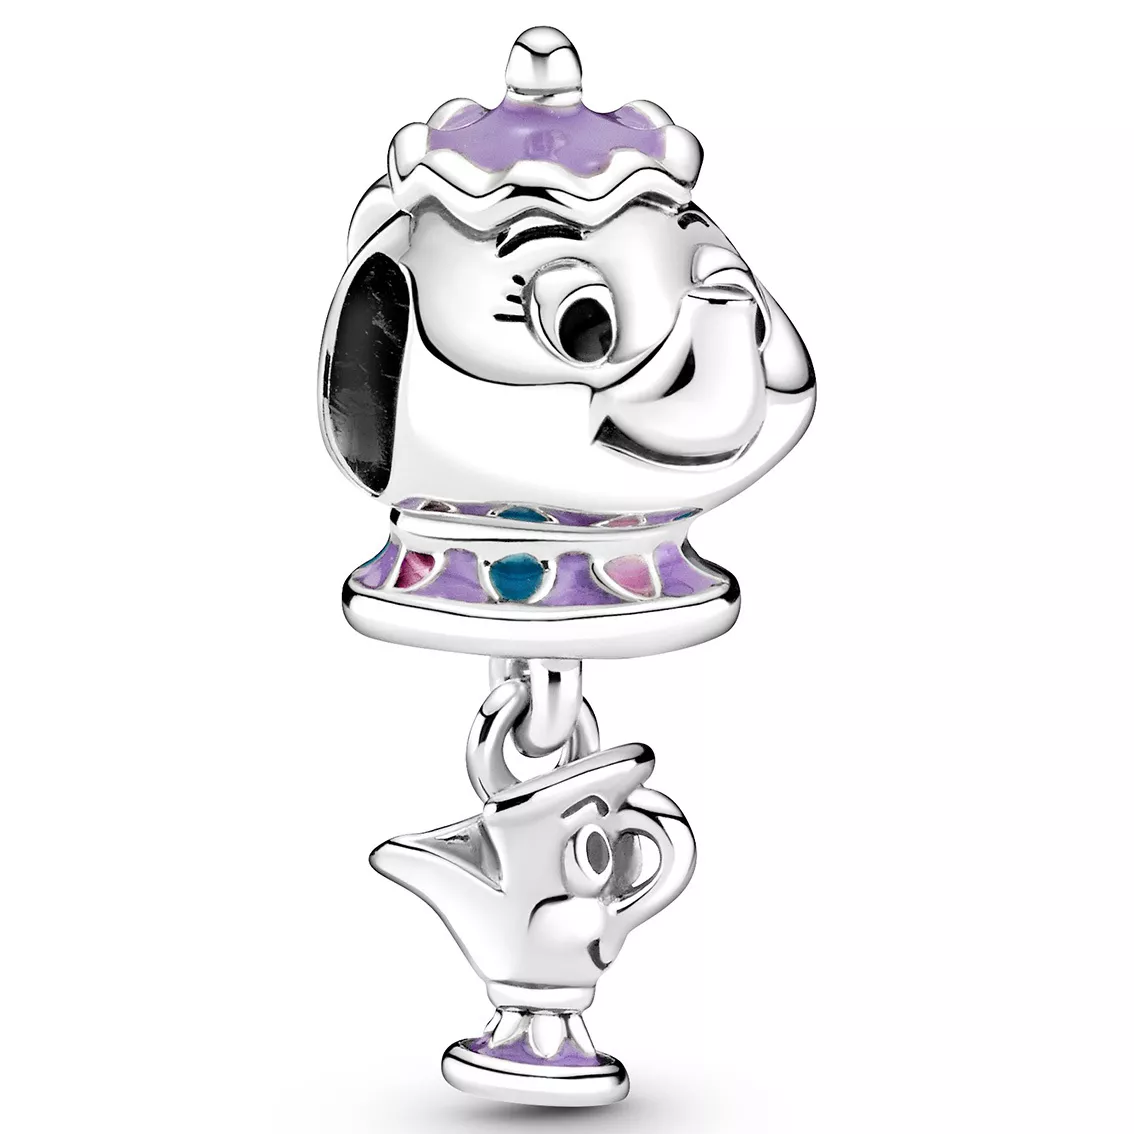 Pandora Disney 799015C01 Hangbedel Beauty and the Beast Mrs. Potts and Chip zilver-emaille